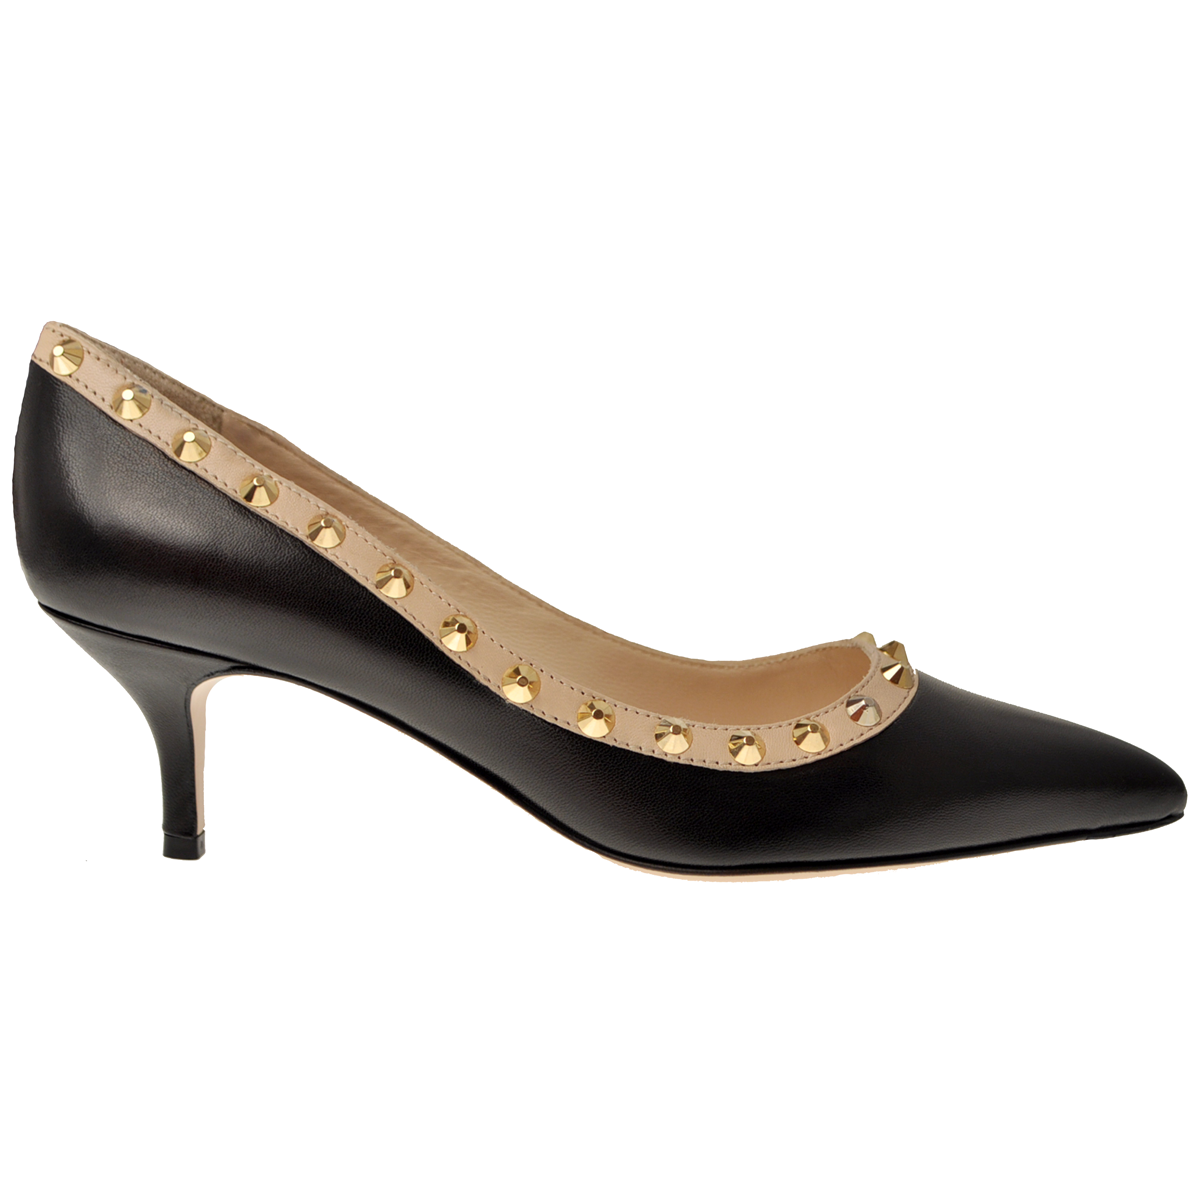 Black Leather kitten pumps with contrasting beige lining and studs. 